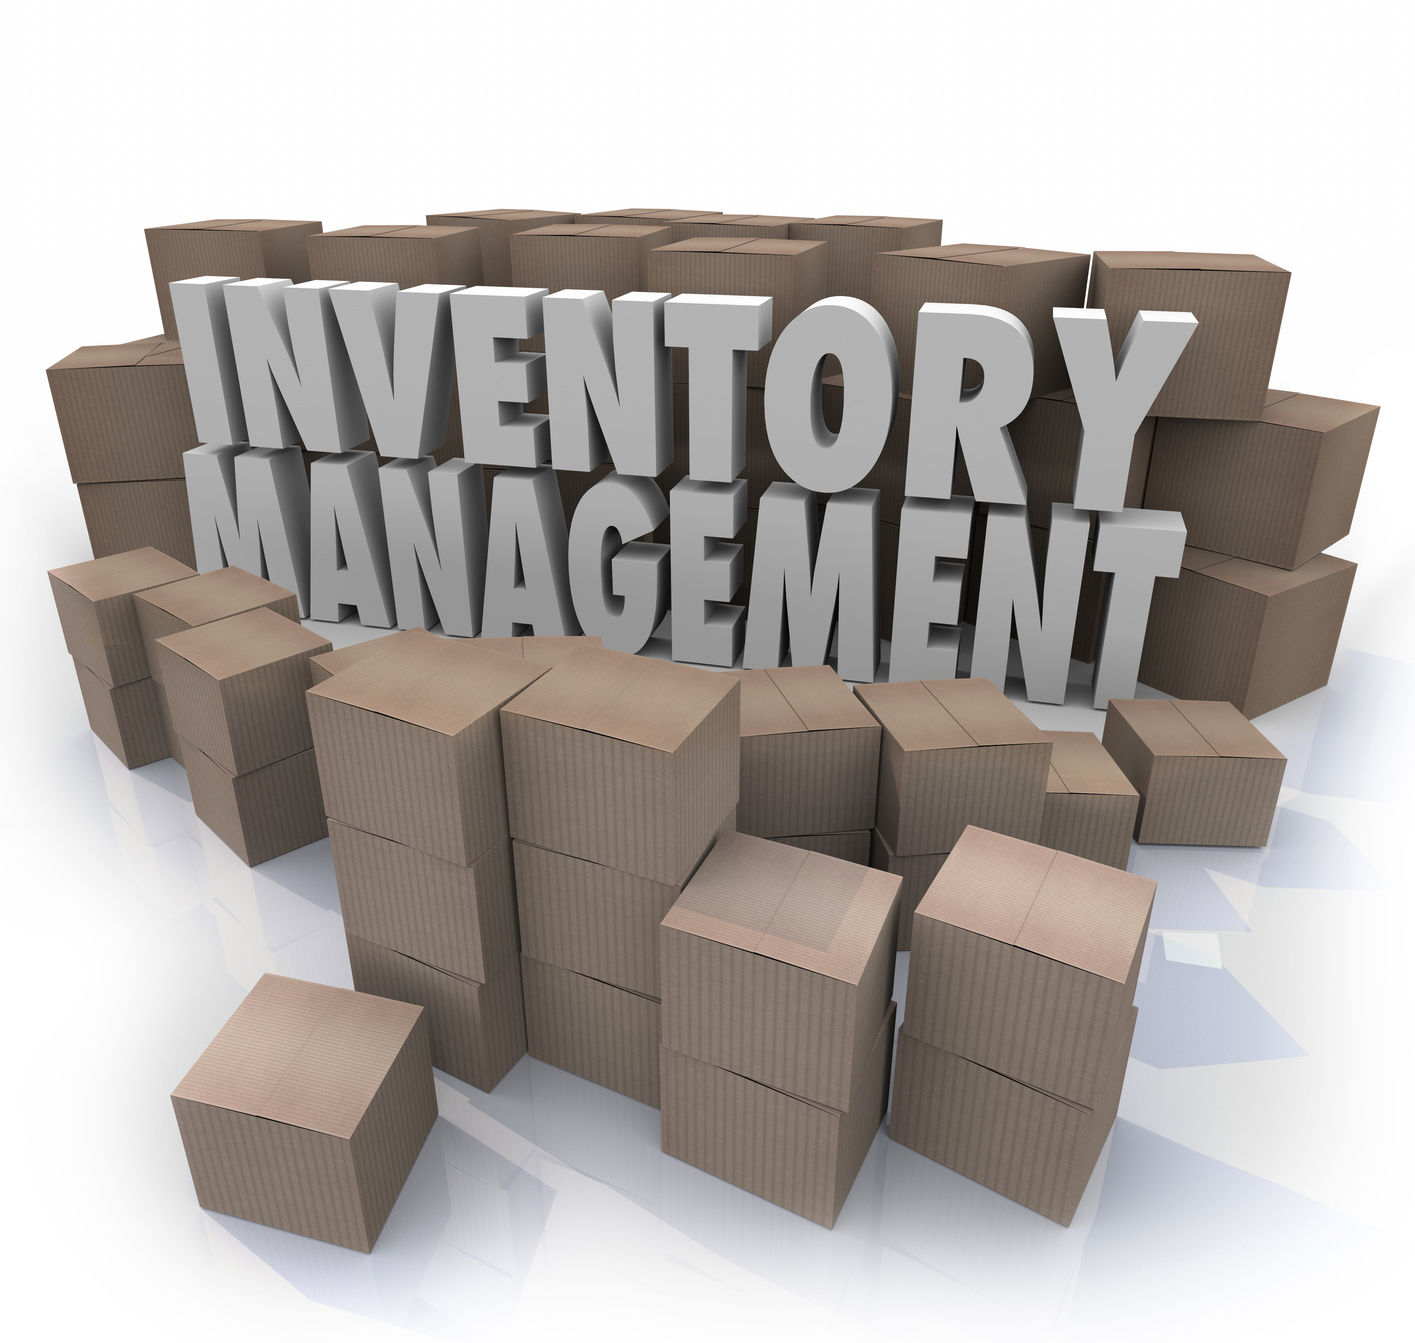 Inventory management words in 3d letters surrounded by cardboard boxes full of products in a warehouse or storage area to illustrate logistics or supply chain control